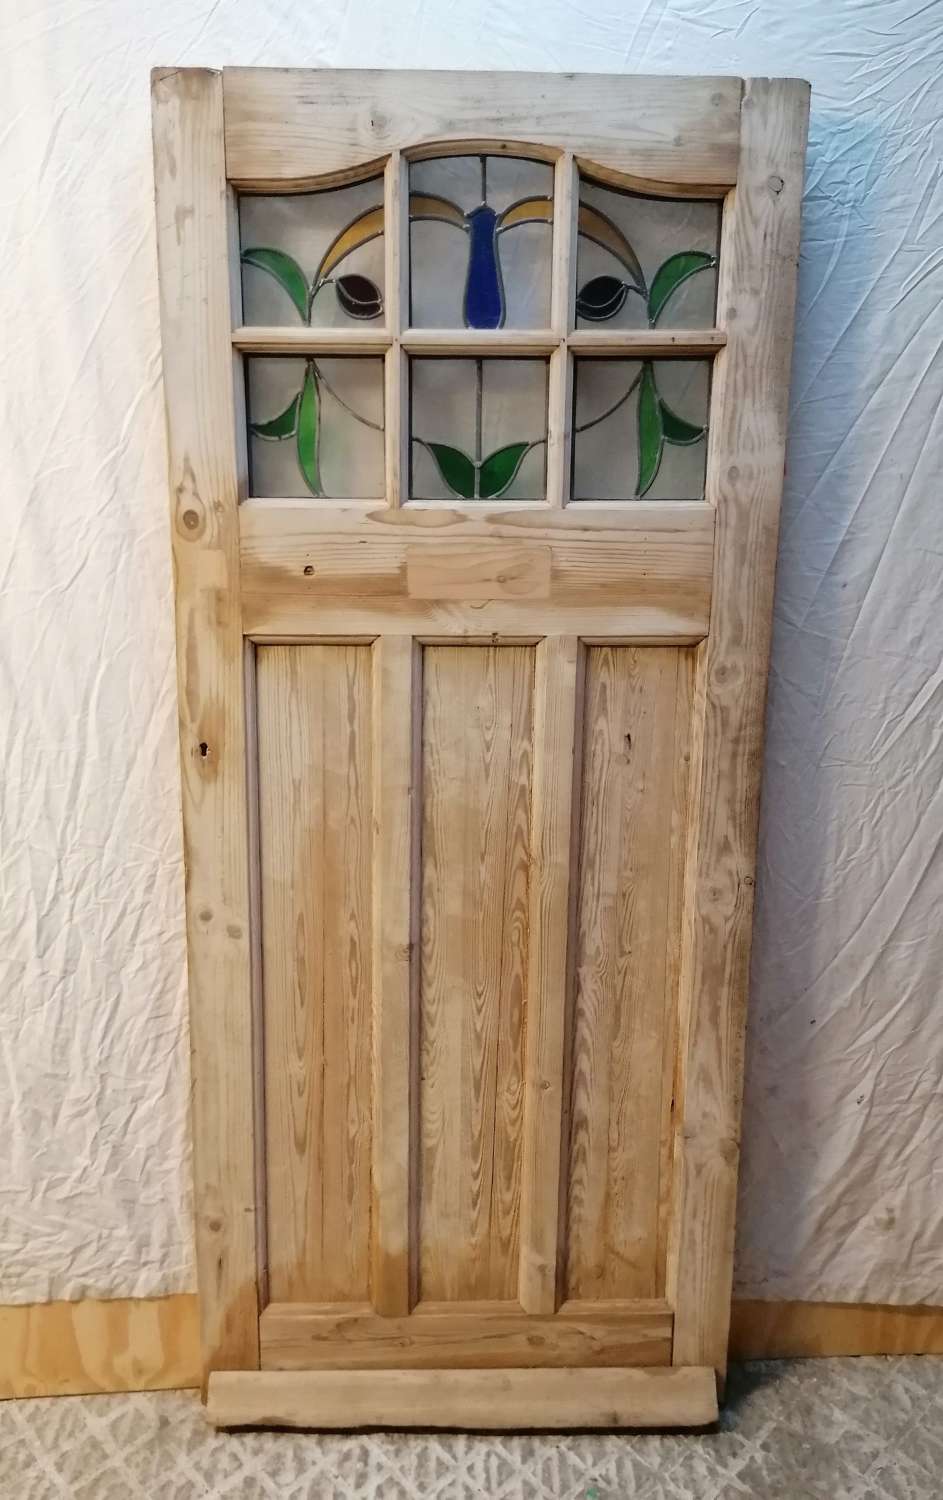 DI0735 AN EDWARDIAN PINE DOOR WITH STAINED GLASS FOR INTERNAL USE